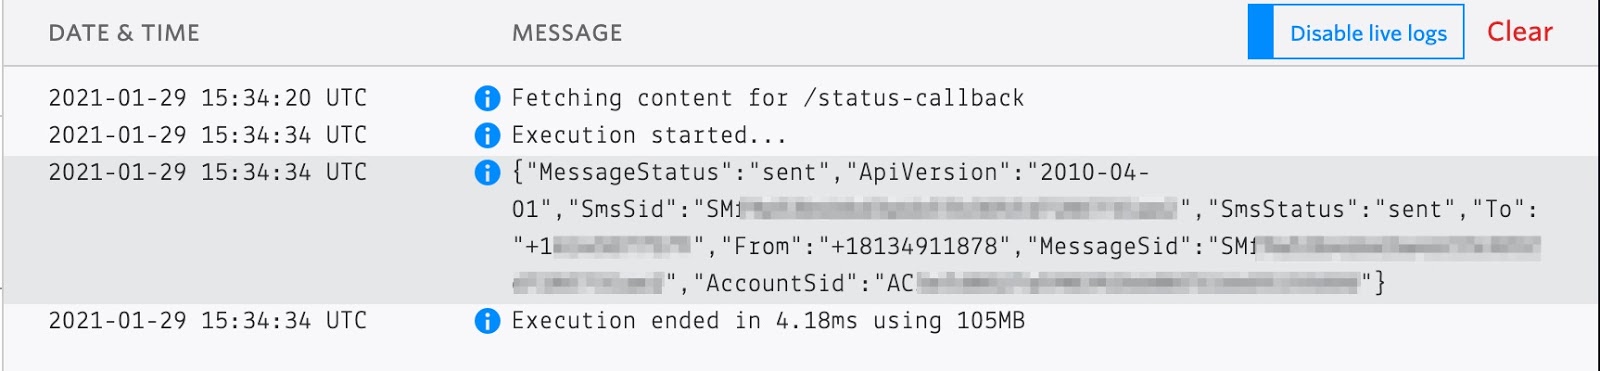 A screenshot of the live logs in Twilio Functions where you can see the various SIDs coming through in the response.